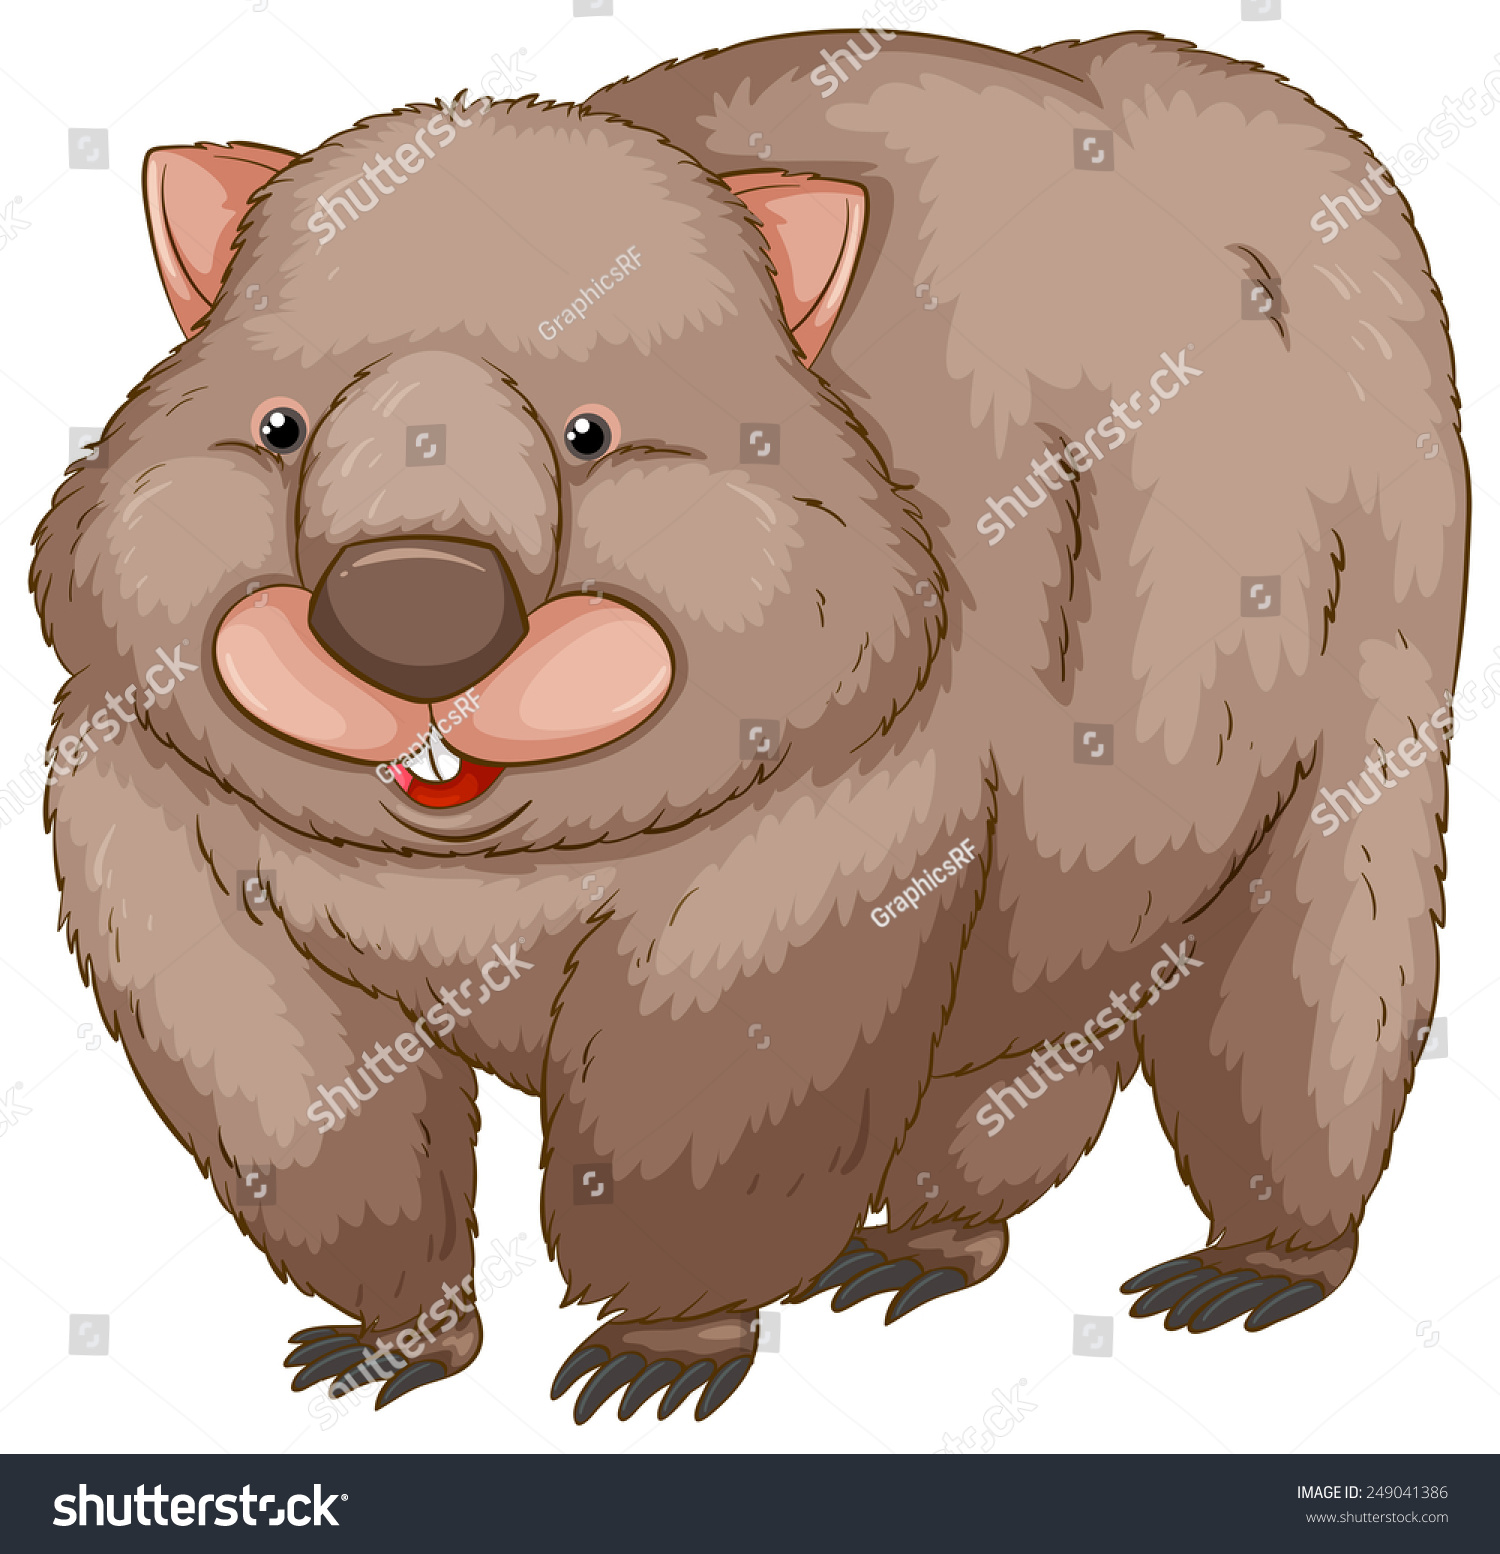 A Wombat On A White Background Stock Vector Illustration 249041386